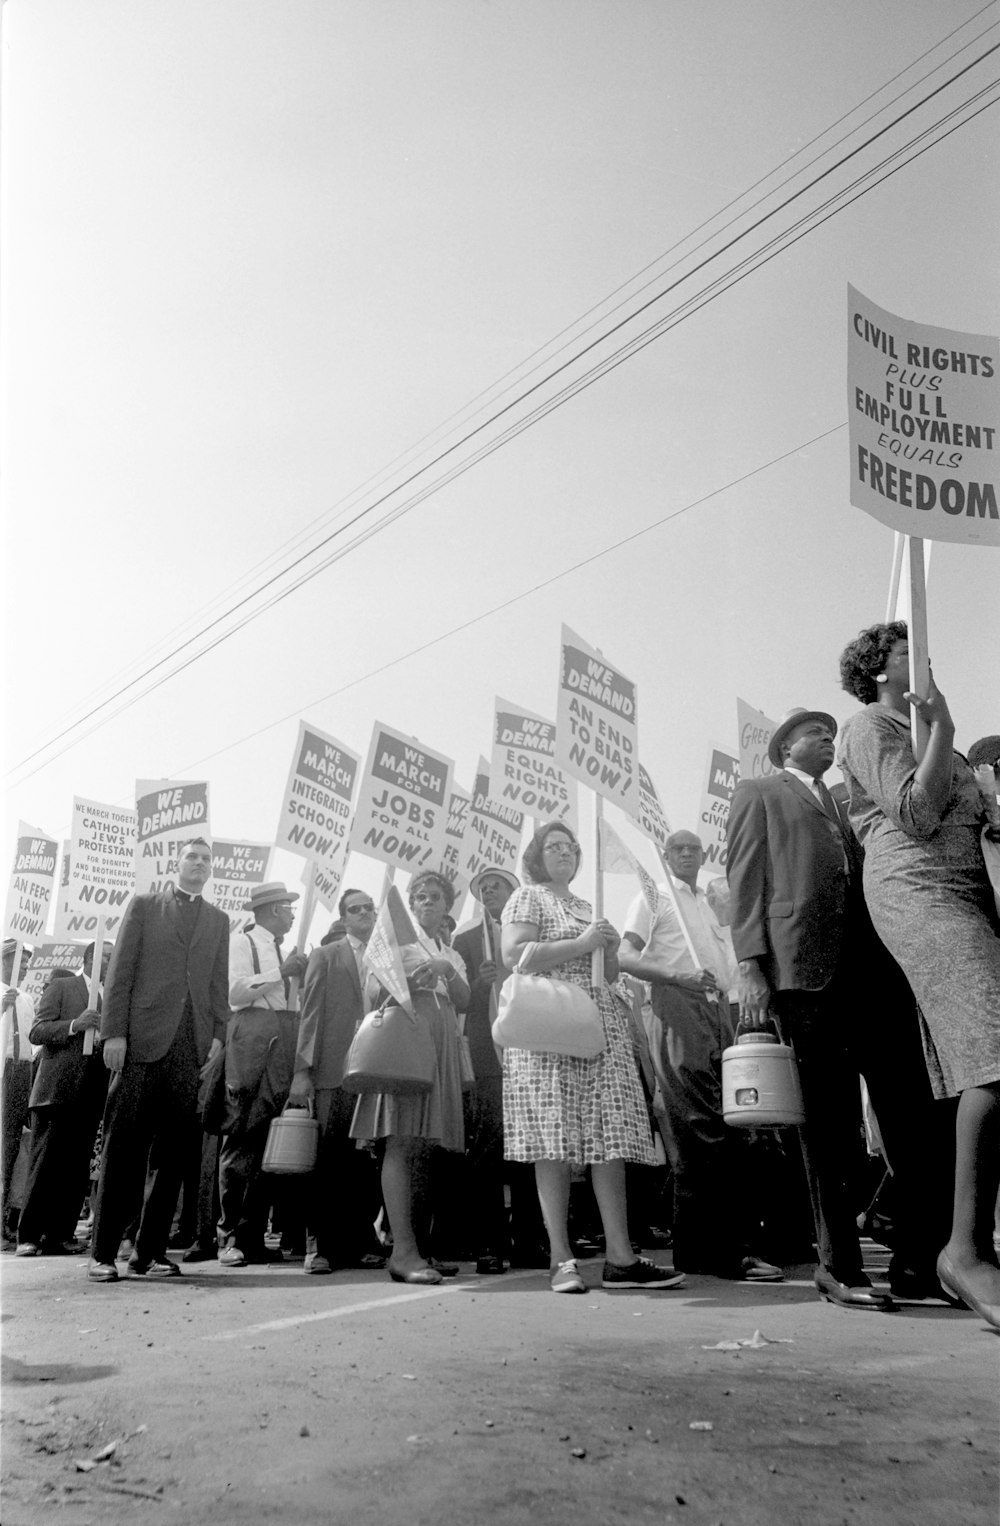 Demonstrators marching in the street holding signs during the March on Washington